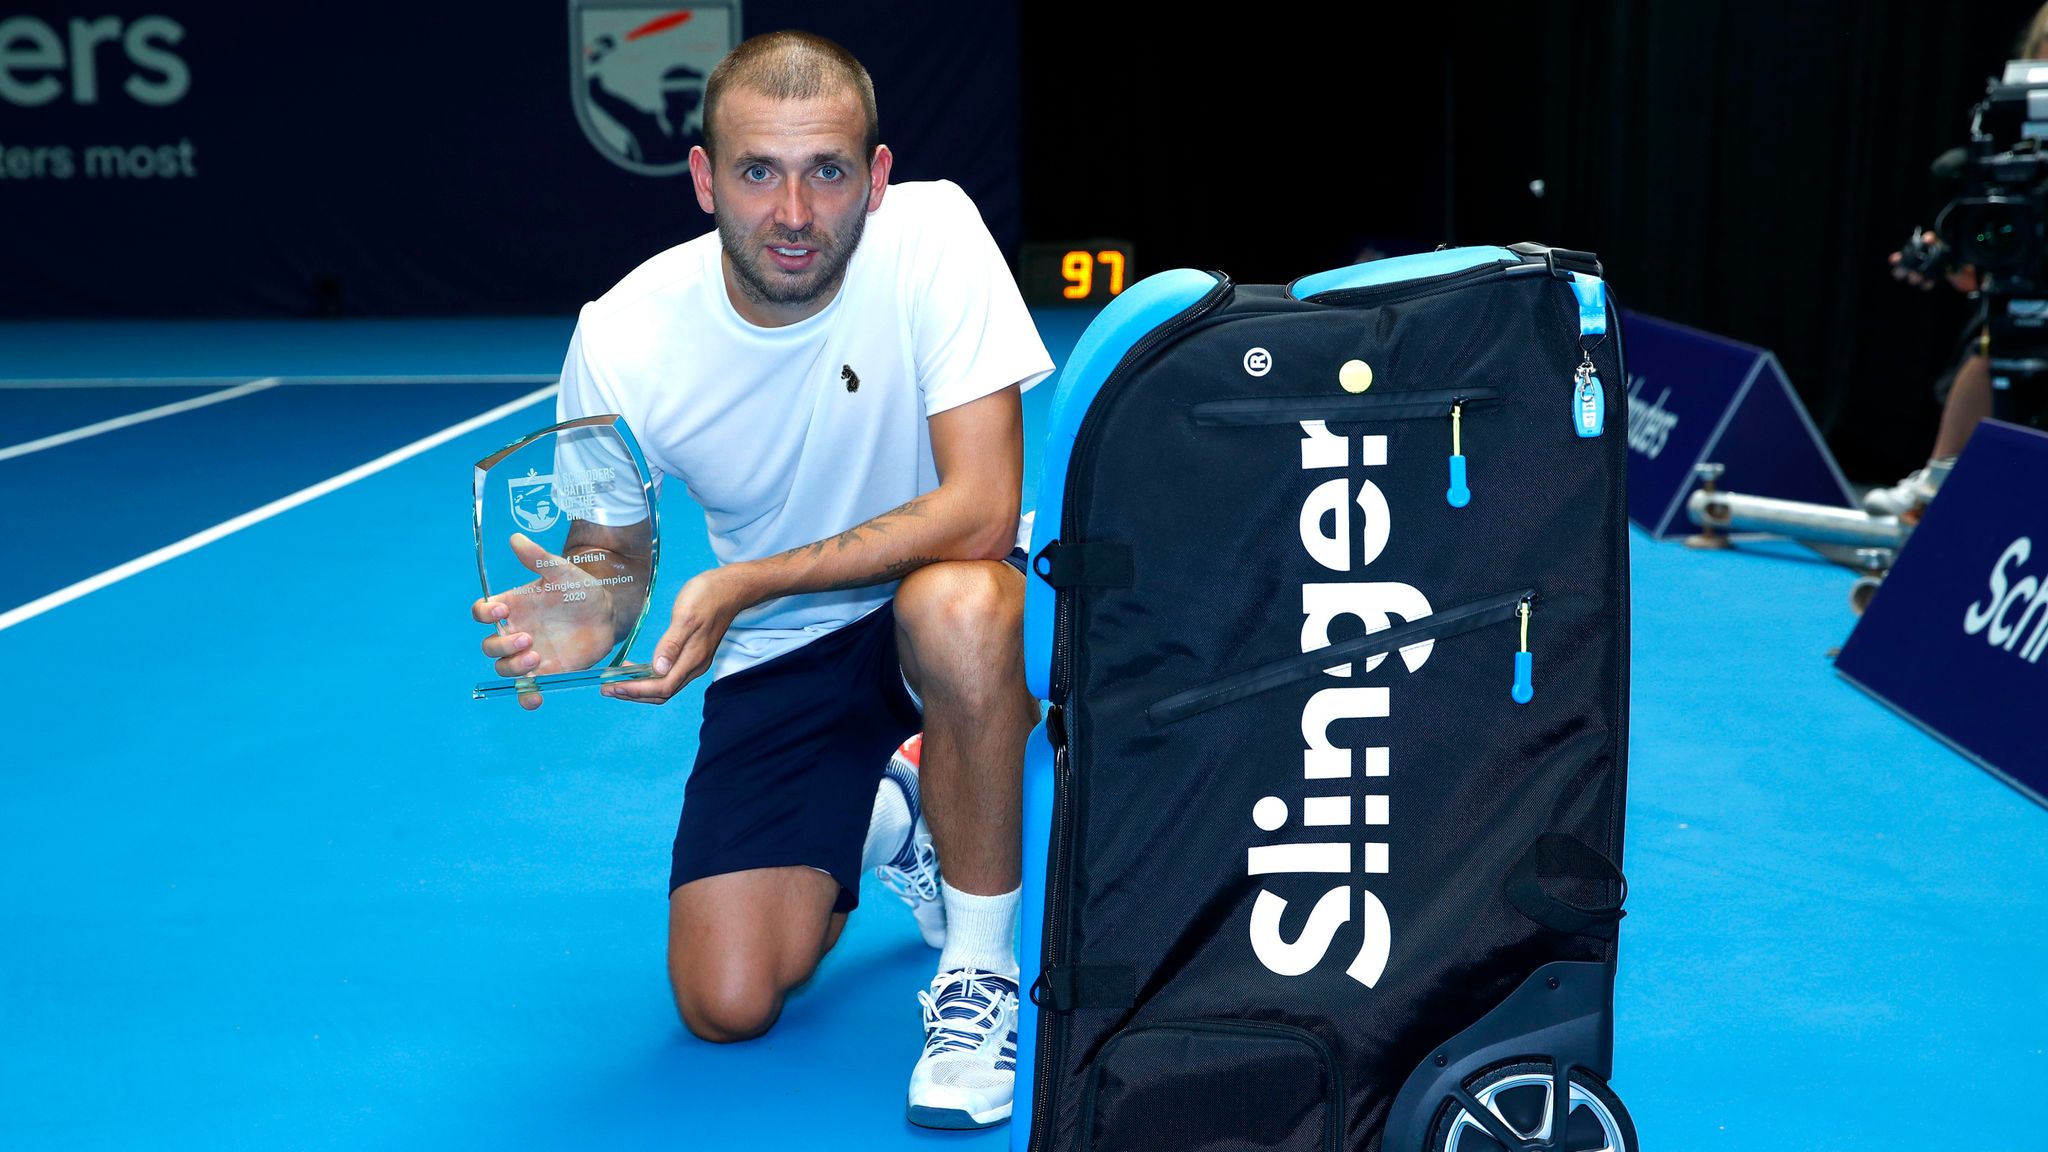 From Bad Boy To Britain S No 1 Dan Evans Has Been Through A Complete Rejuvenation Tennis News Sky Sports